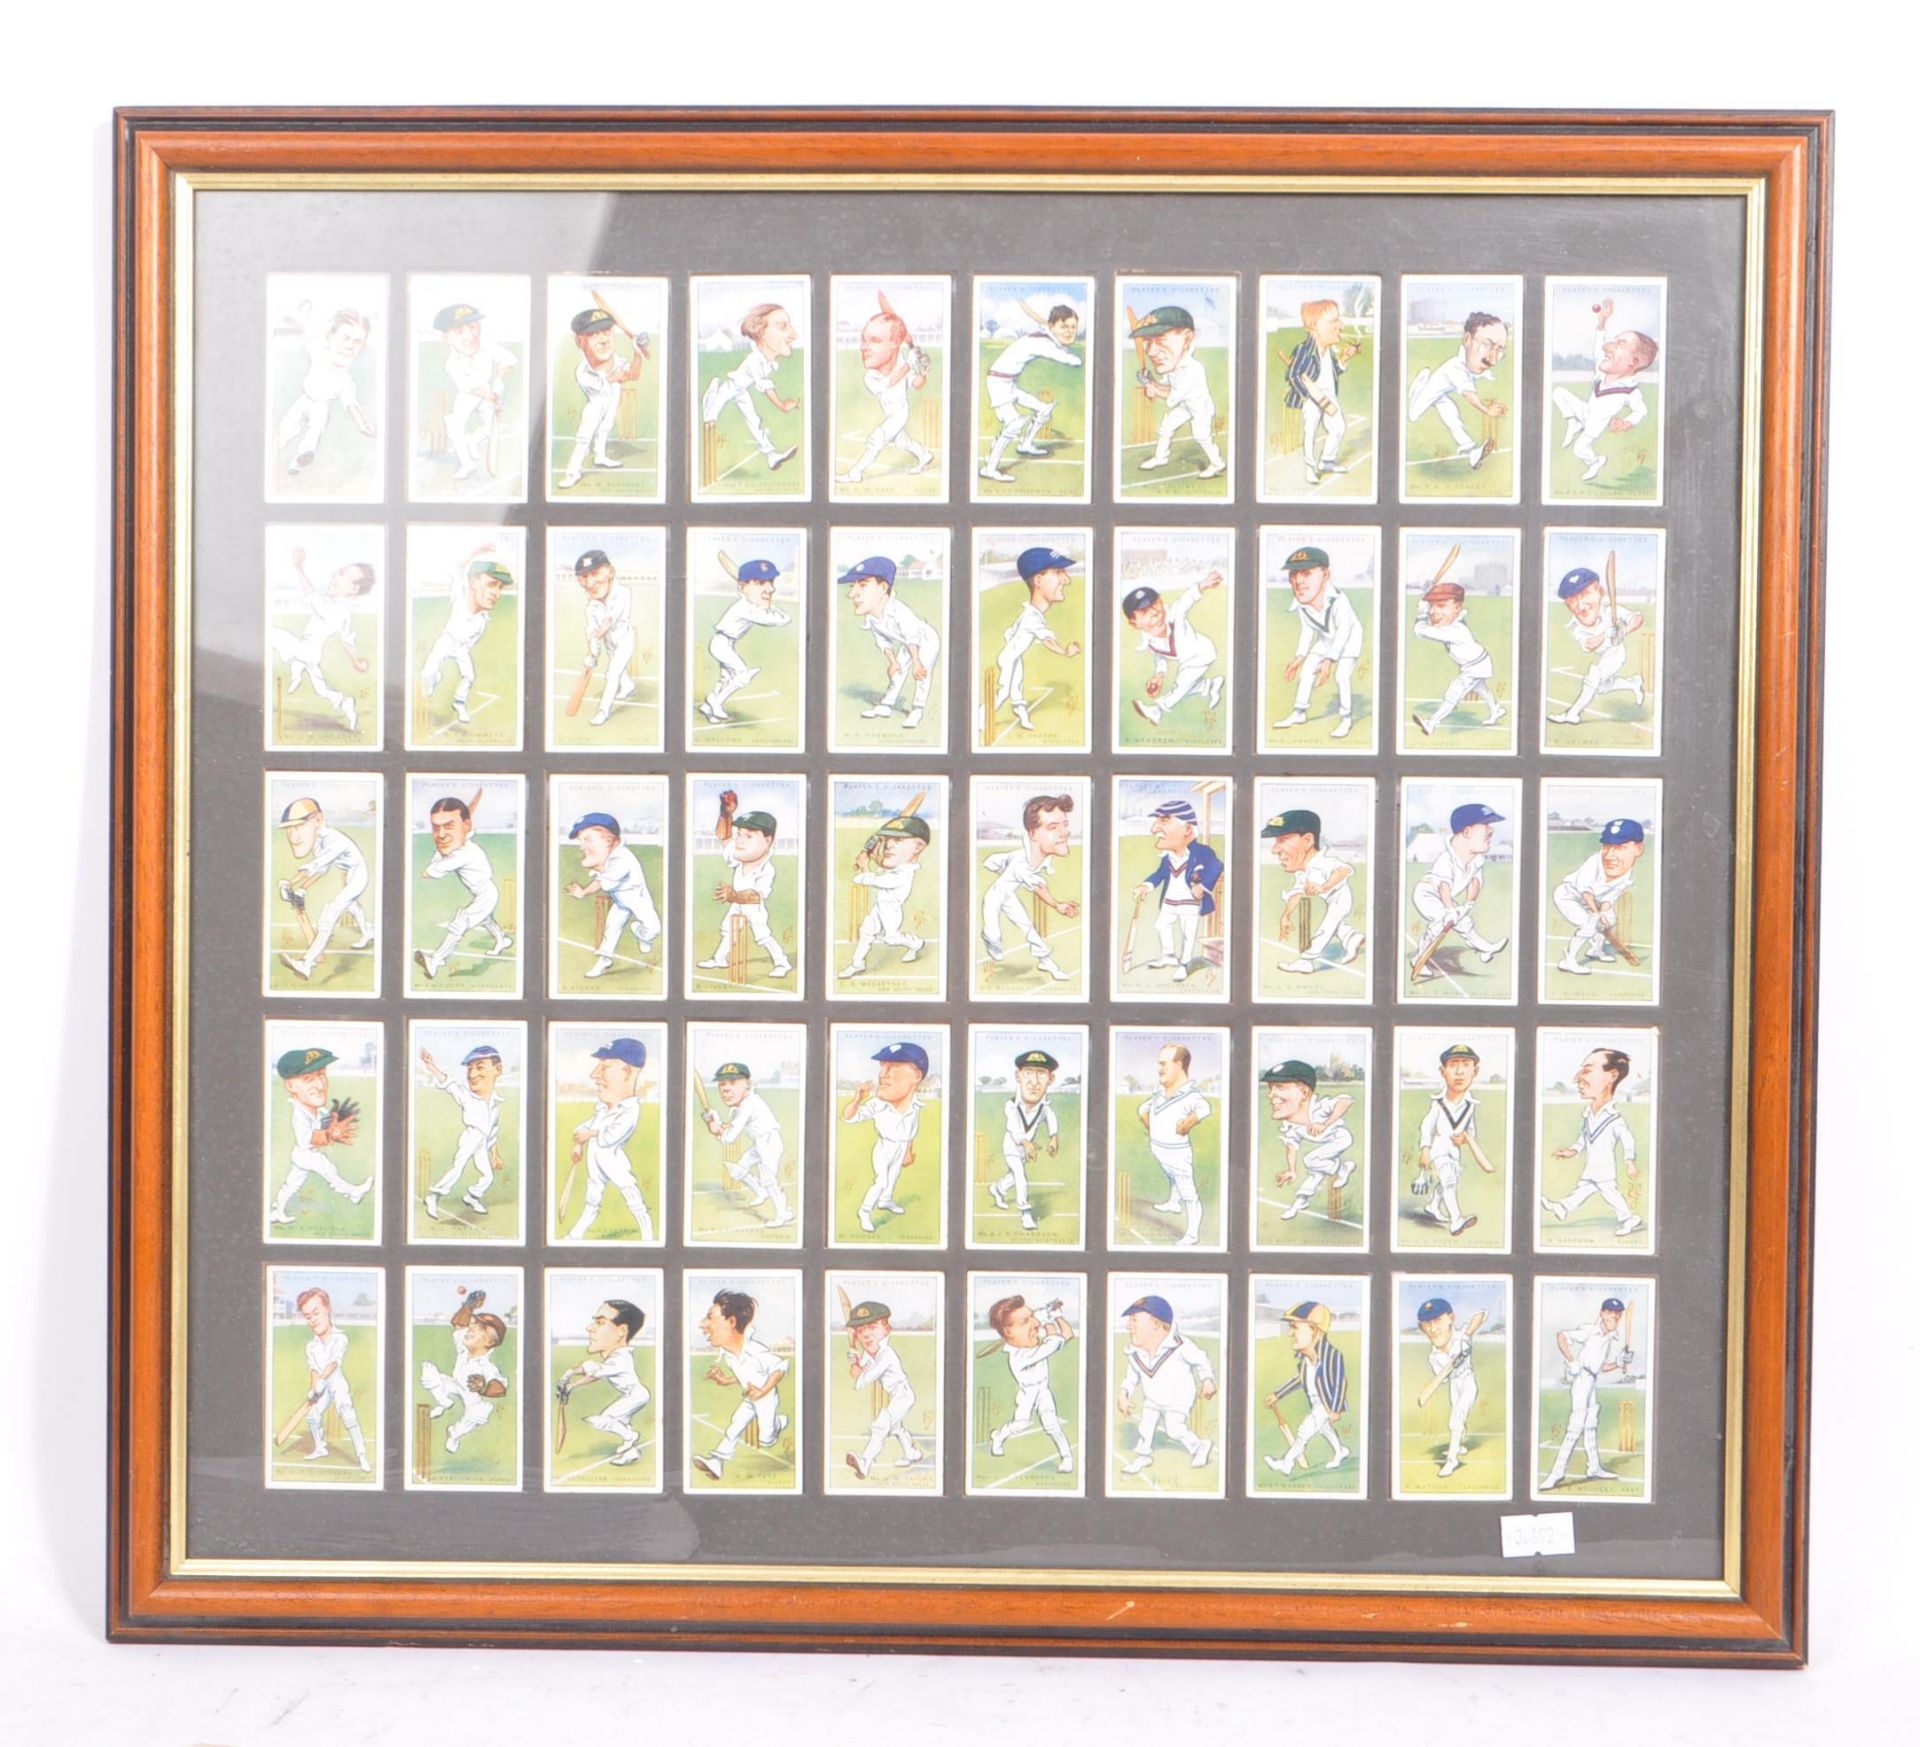 PLAYERS CIGARETTES - COLLECTION OF CRICKET CIGARETTE CARDS